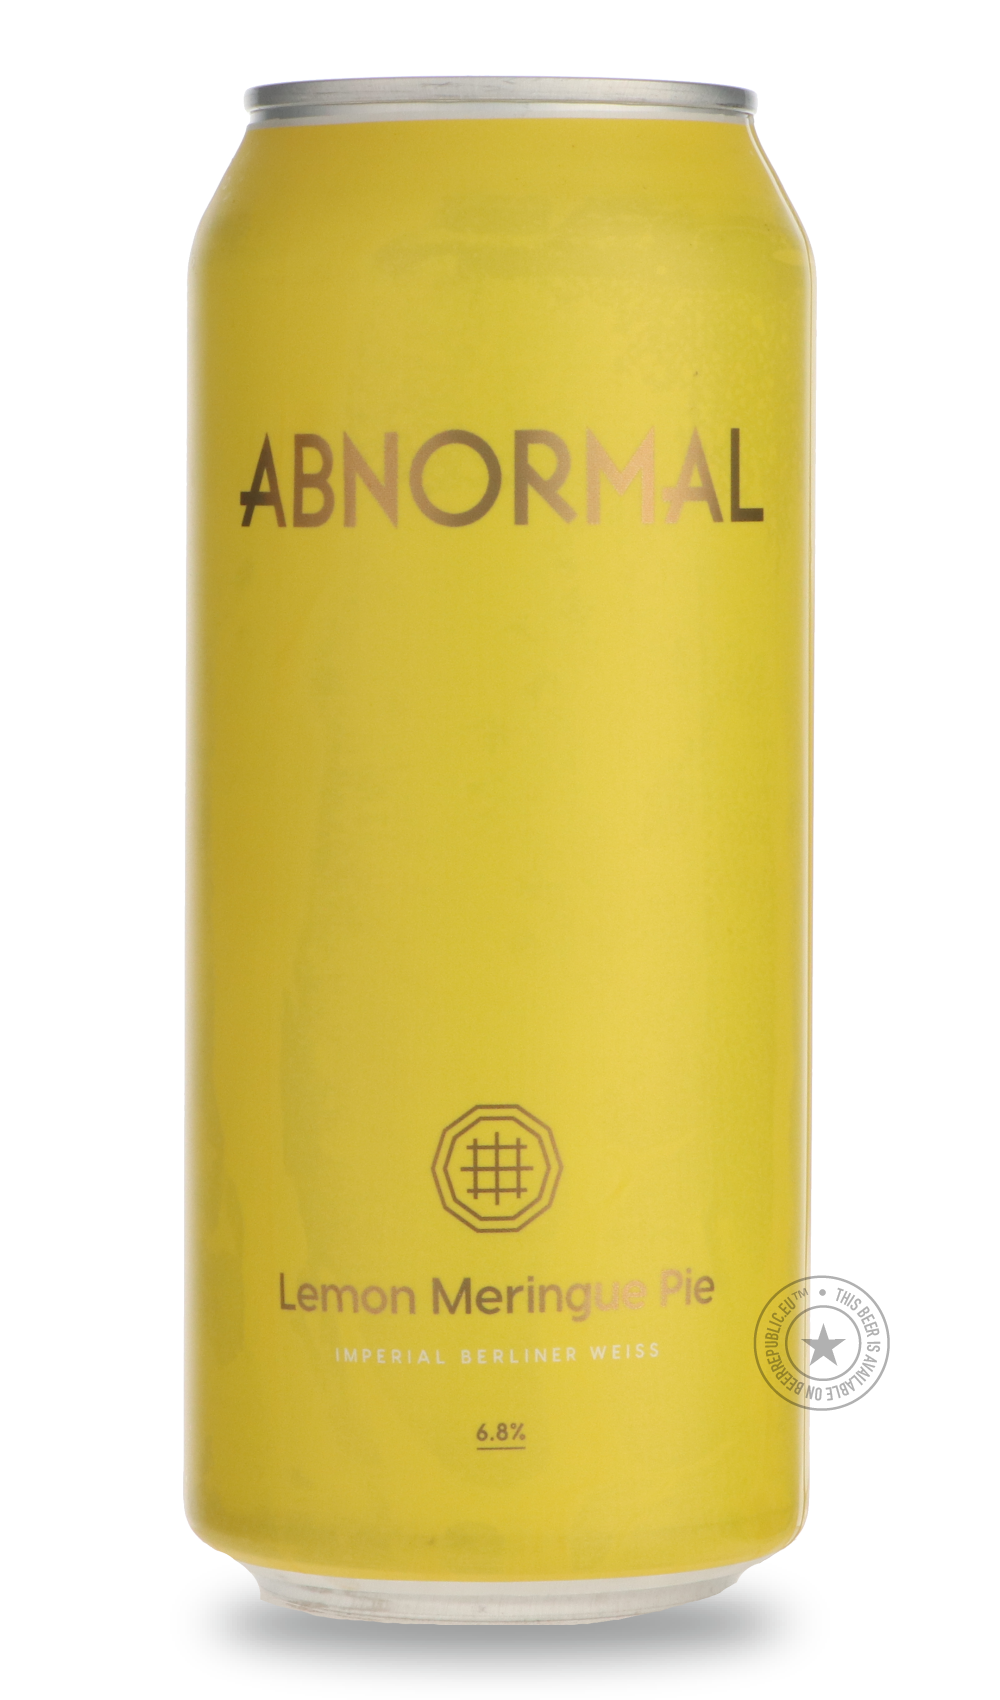 -Abnormal- Lemon Meringue Pie-Sour / Wild & Fruity- Only @ Beer Republic - The best online beer store for American & Canadian craft beer - Buy beer online from the USA and Canada - Bier online kopen - Amerikaans bier kopen - Craft beer store - Craft beer kopen - Amerikanisch bier kaufen - Bier online kaufen - Acheter biere online - IPA - Stout - Porter - New England IPA - Hazy IPA - Imperial Stout - Barrel Aged - Barrel Aged Imperial Stout - Brown - Dark beer - Blond - Blonde - Pilsner - Lager - Wheat - Wei